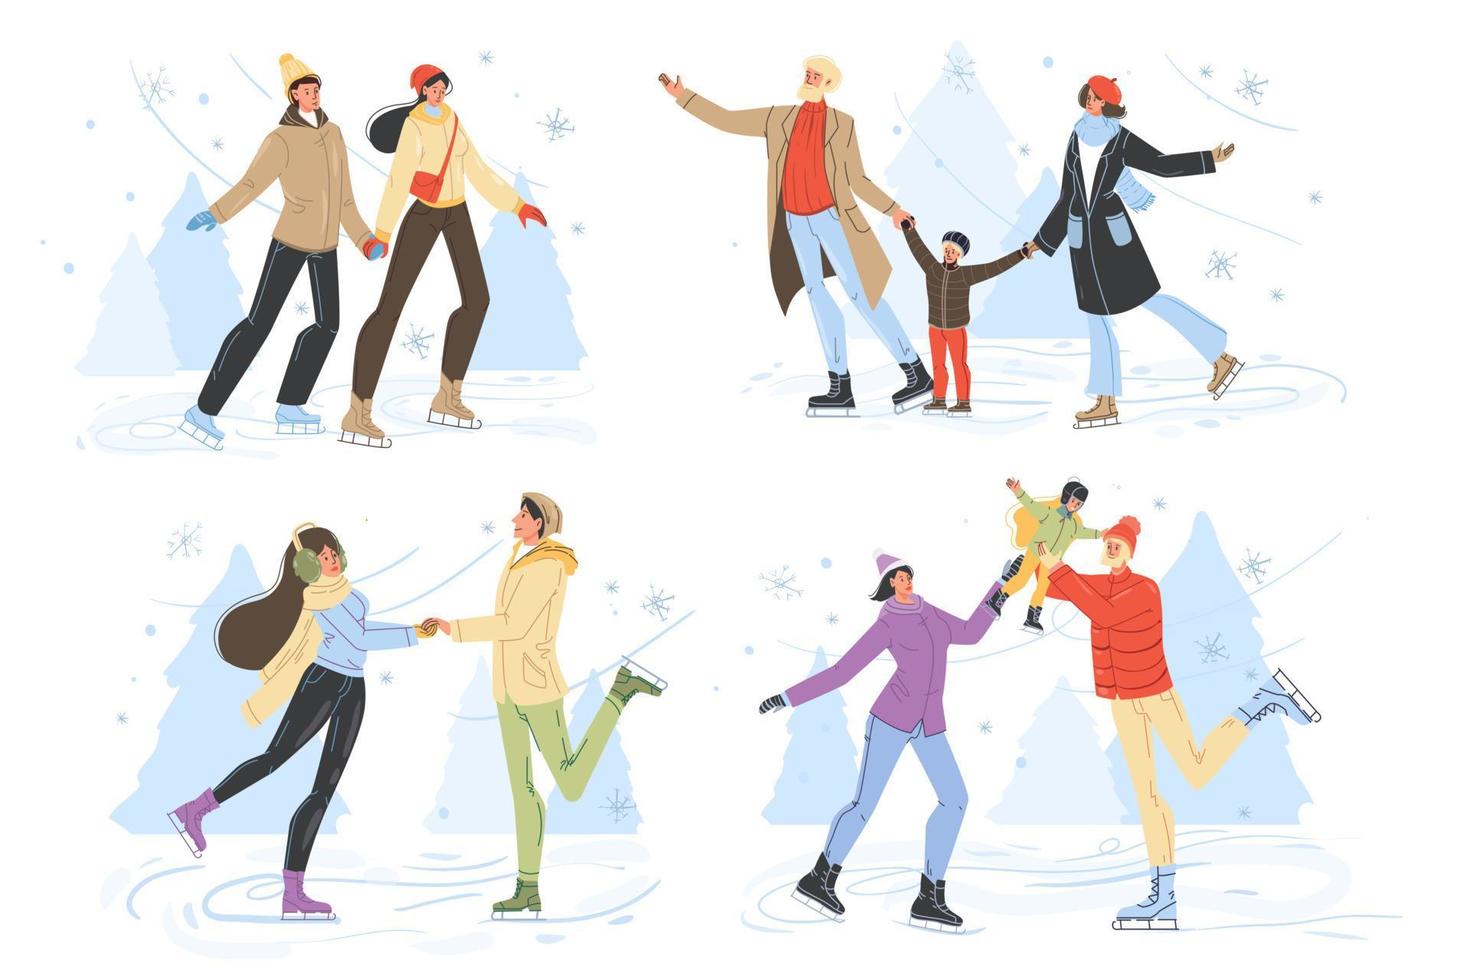 People ice-skating on rink family winter scene set vector